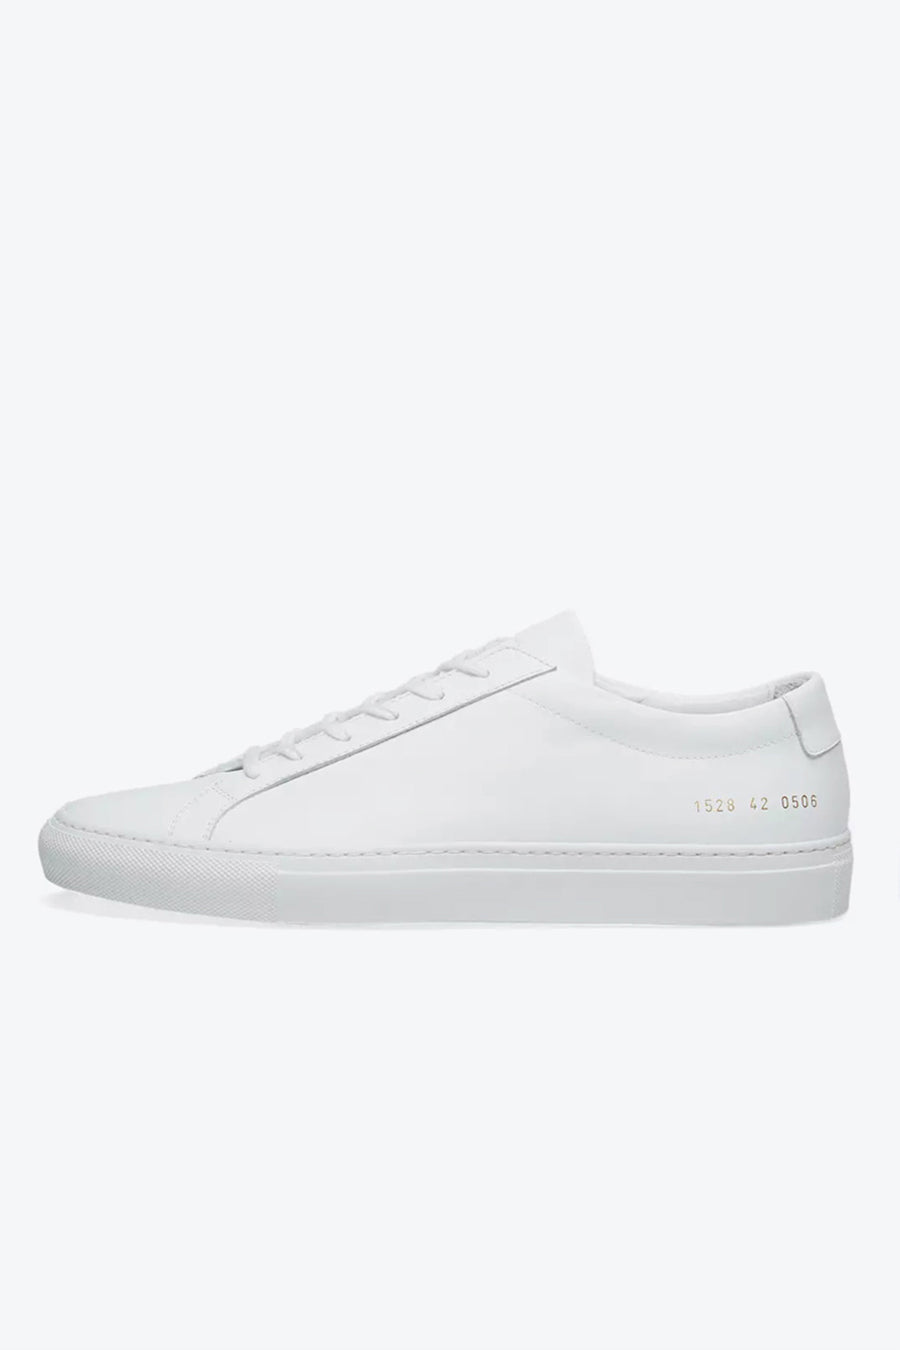 COMMONPROJECTS ACHILLES LOW 26-26.5 1528